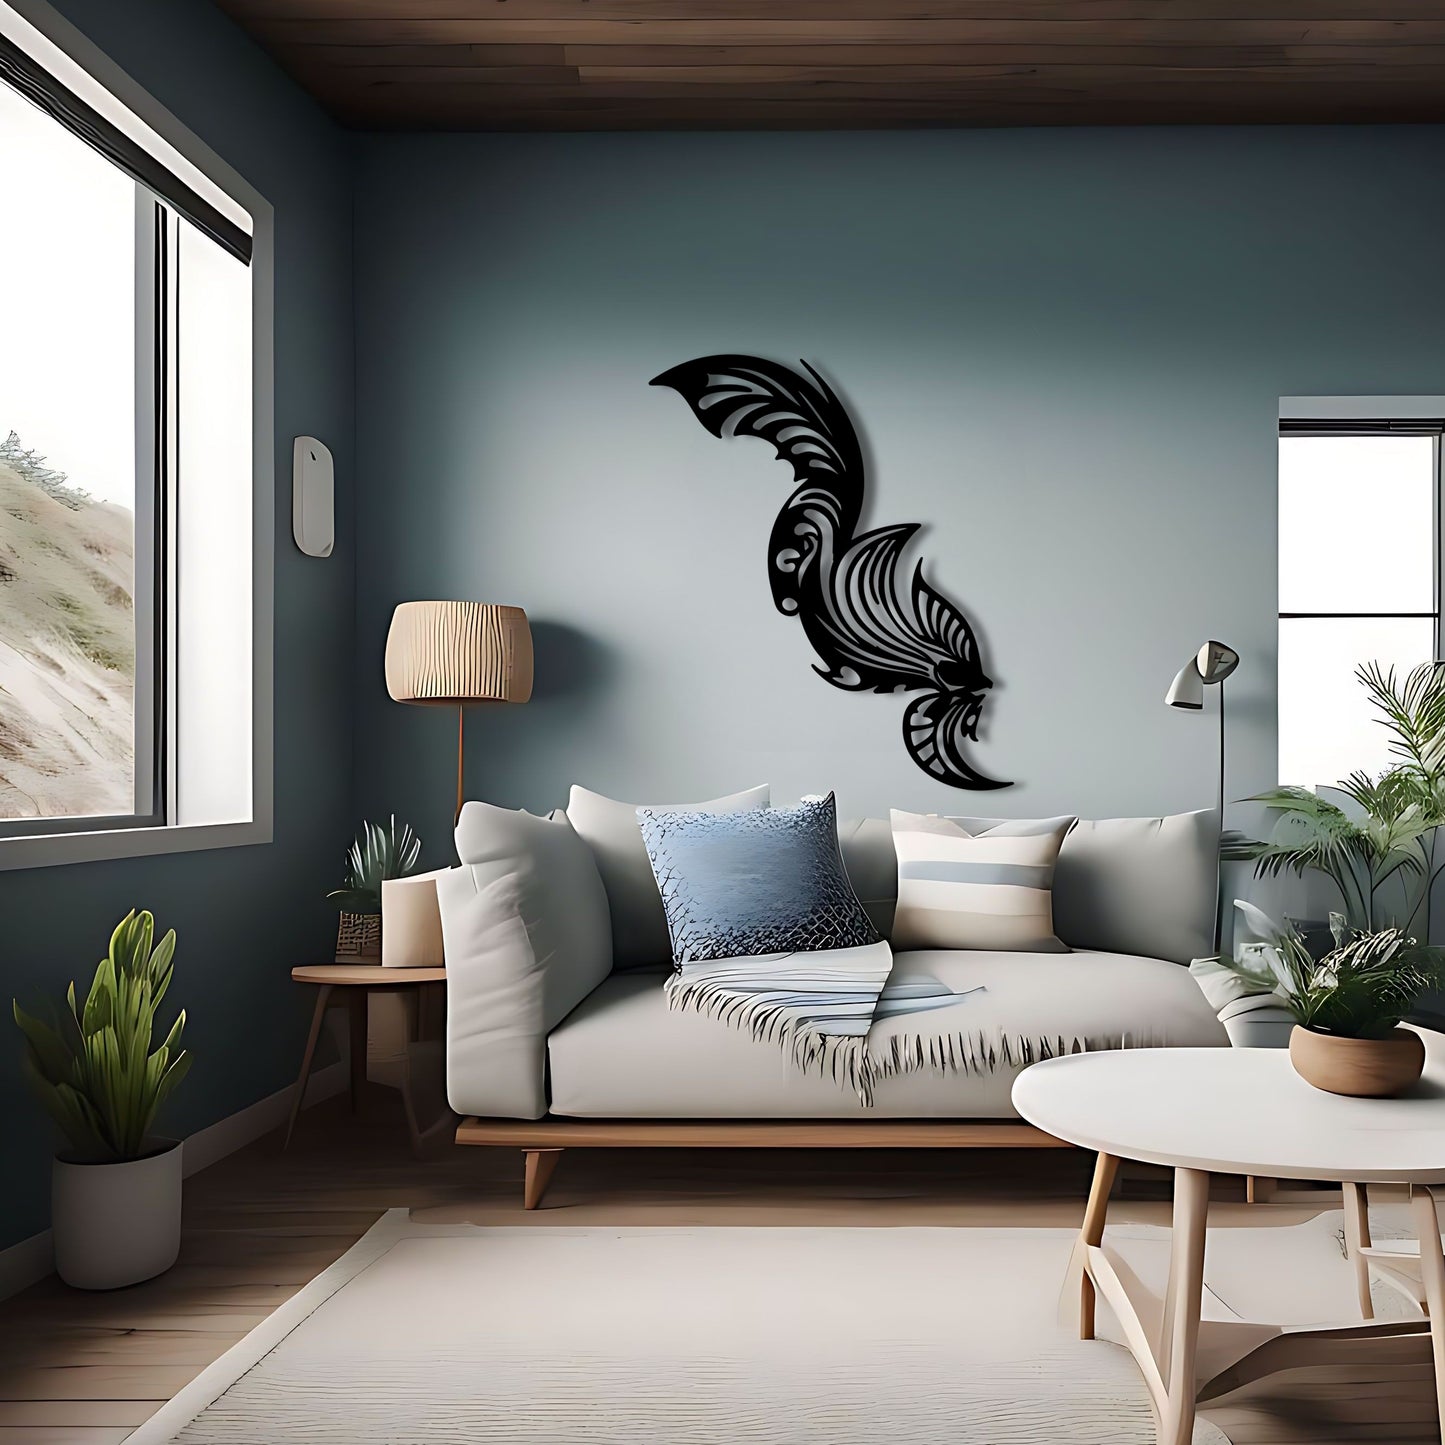 Intricate Betta Fish Silhouette Metal Wall Art for Home Decor